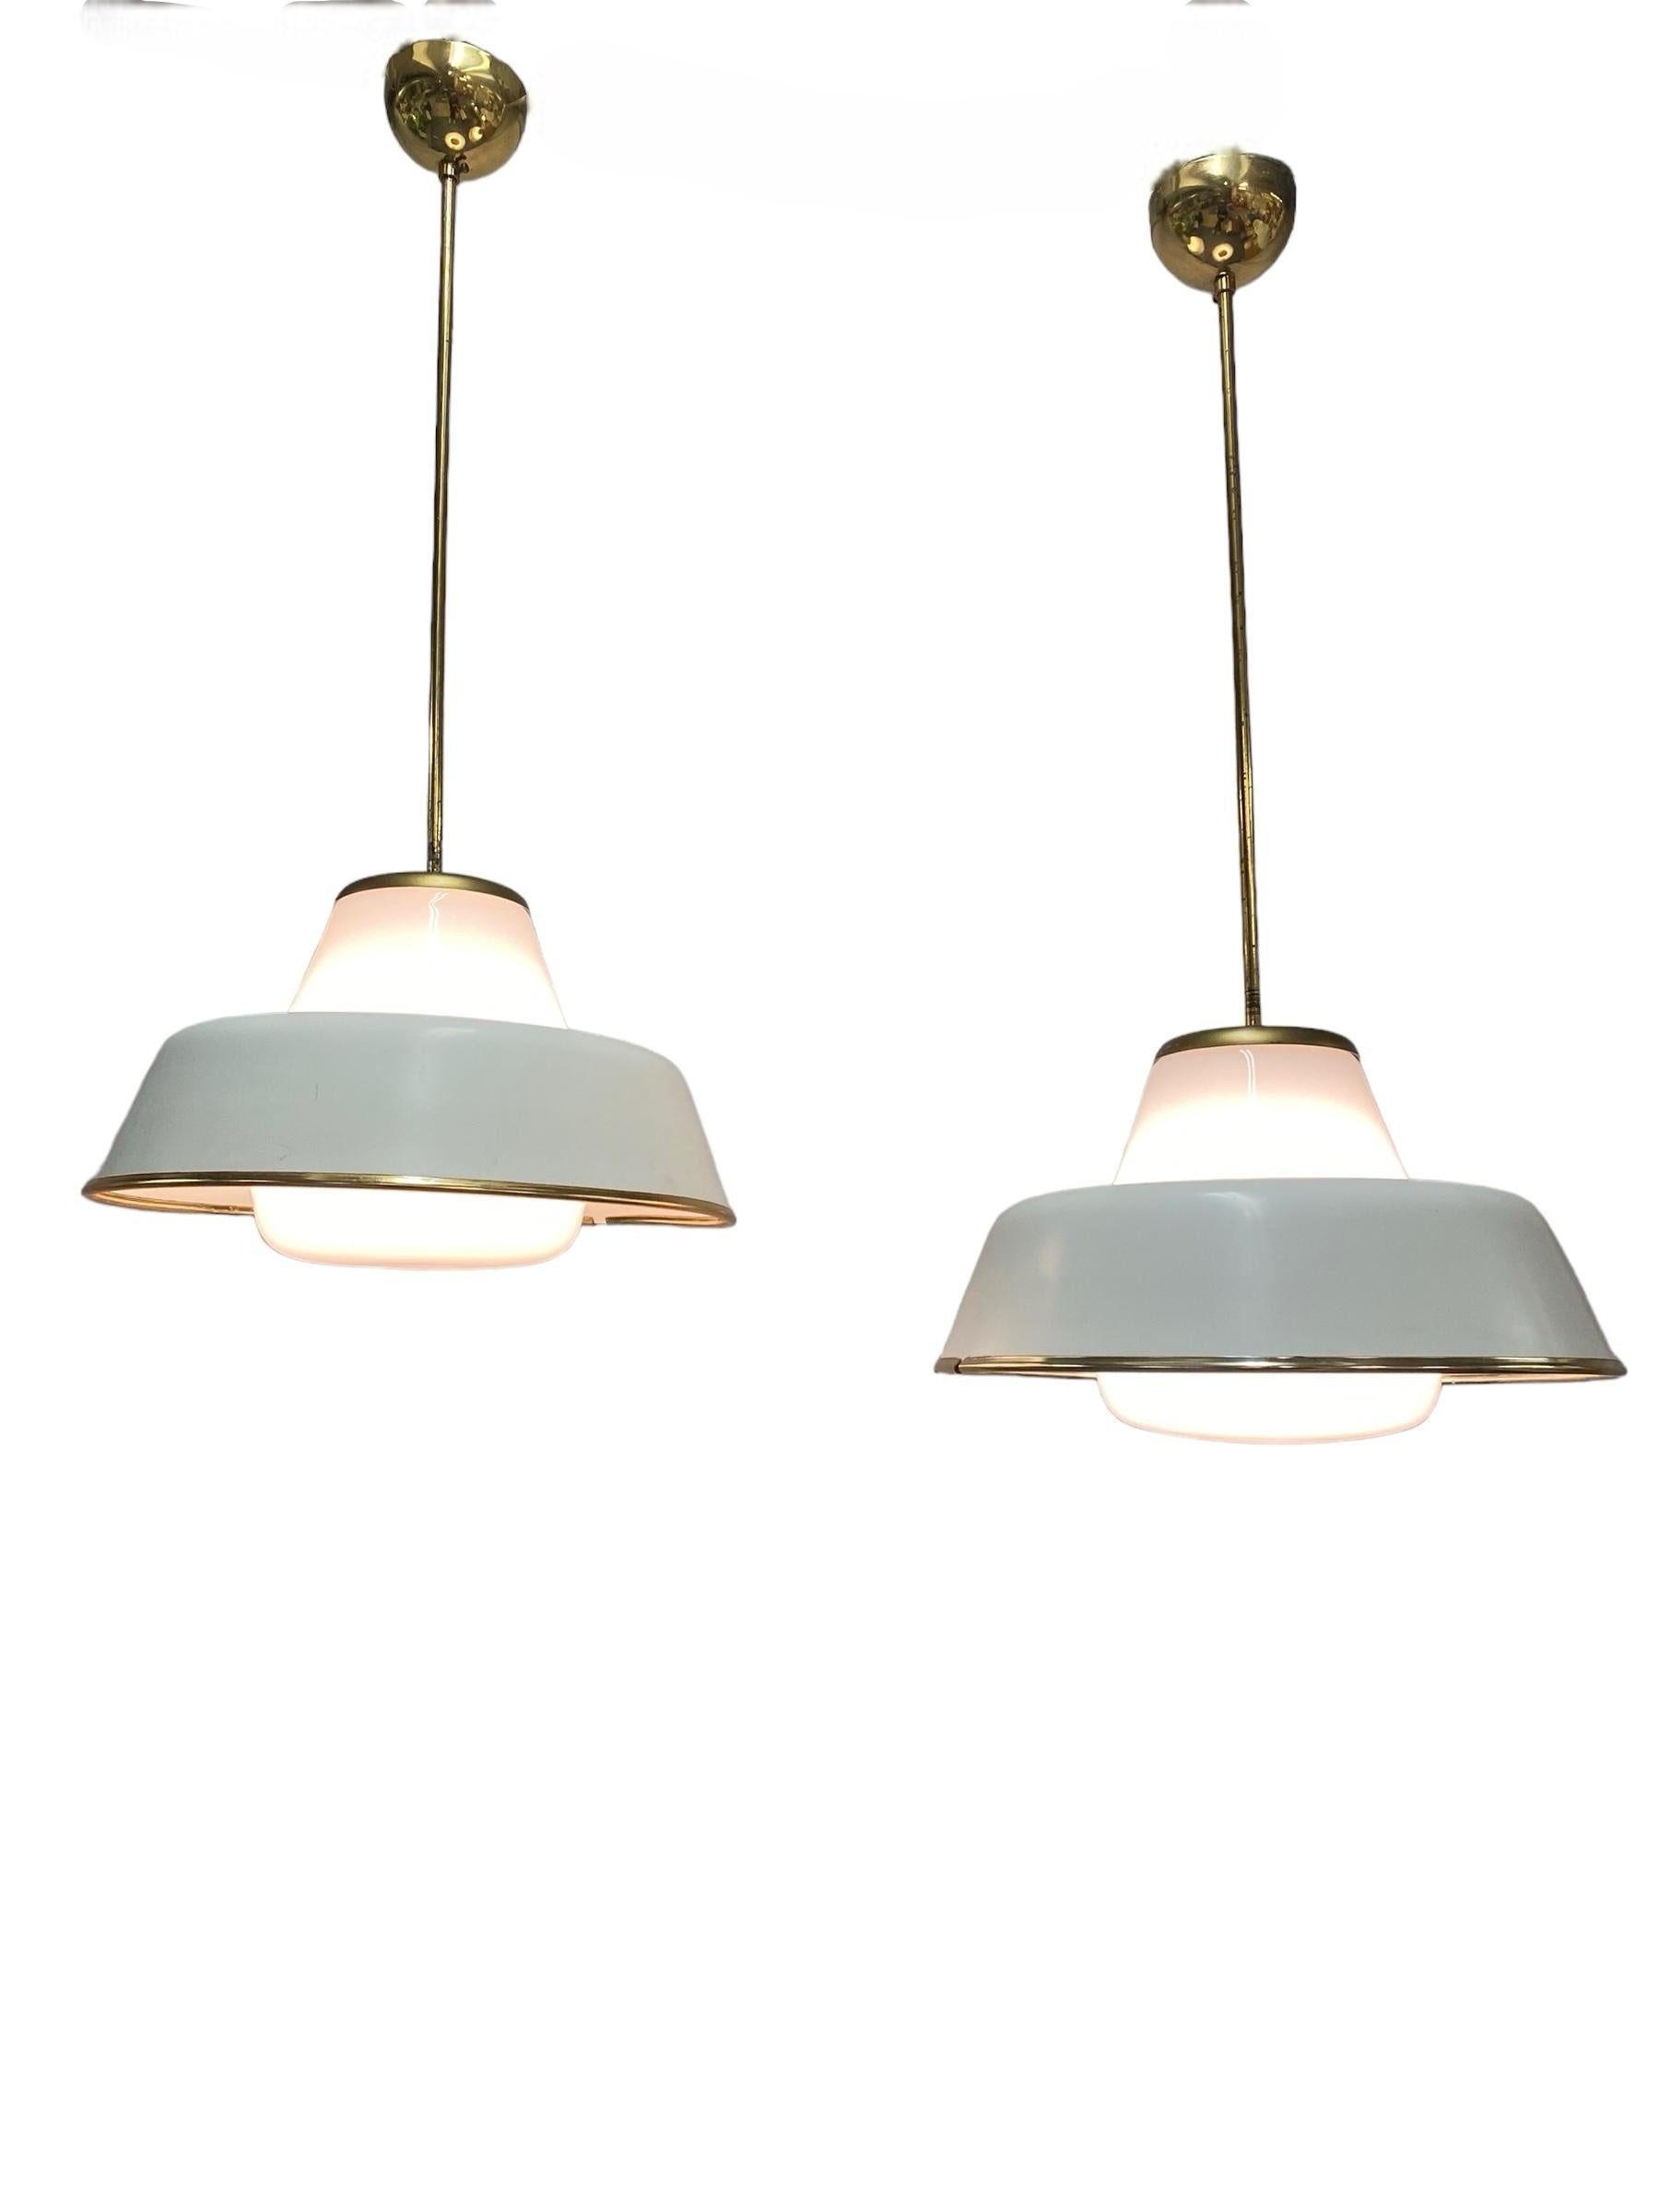 Impressive original pair of Lisa Johansson-Pape ceiling pendants model 61-347, manufactured by Orno in Finland in the 1950s. This UFO like shaped lamp was quite popular back then, and still is now. It's found in both public buildings and private